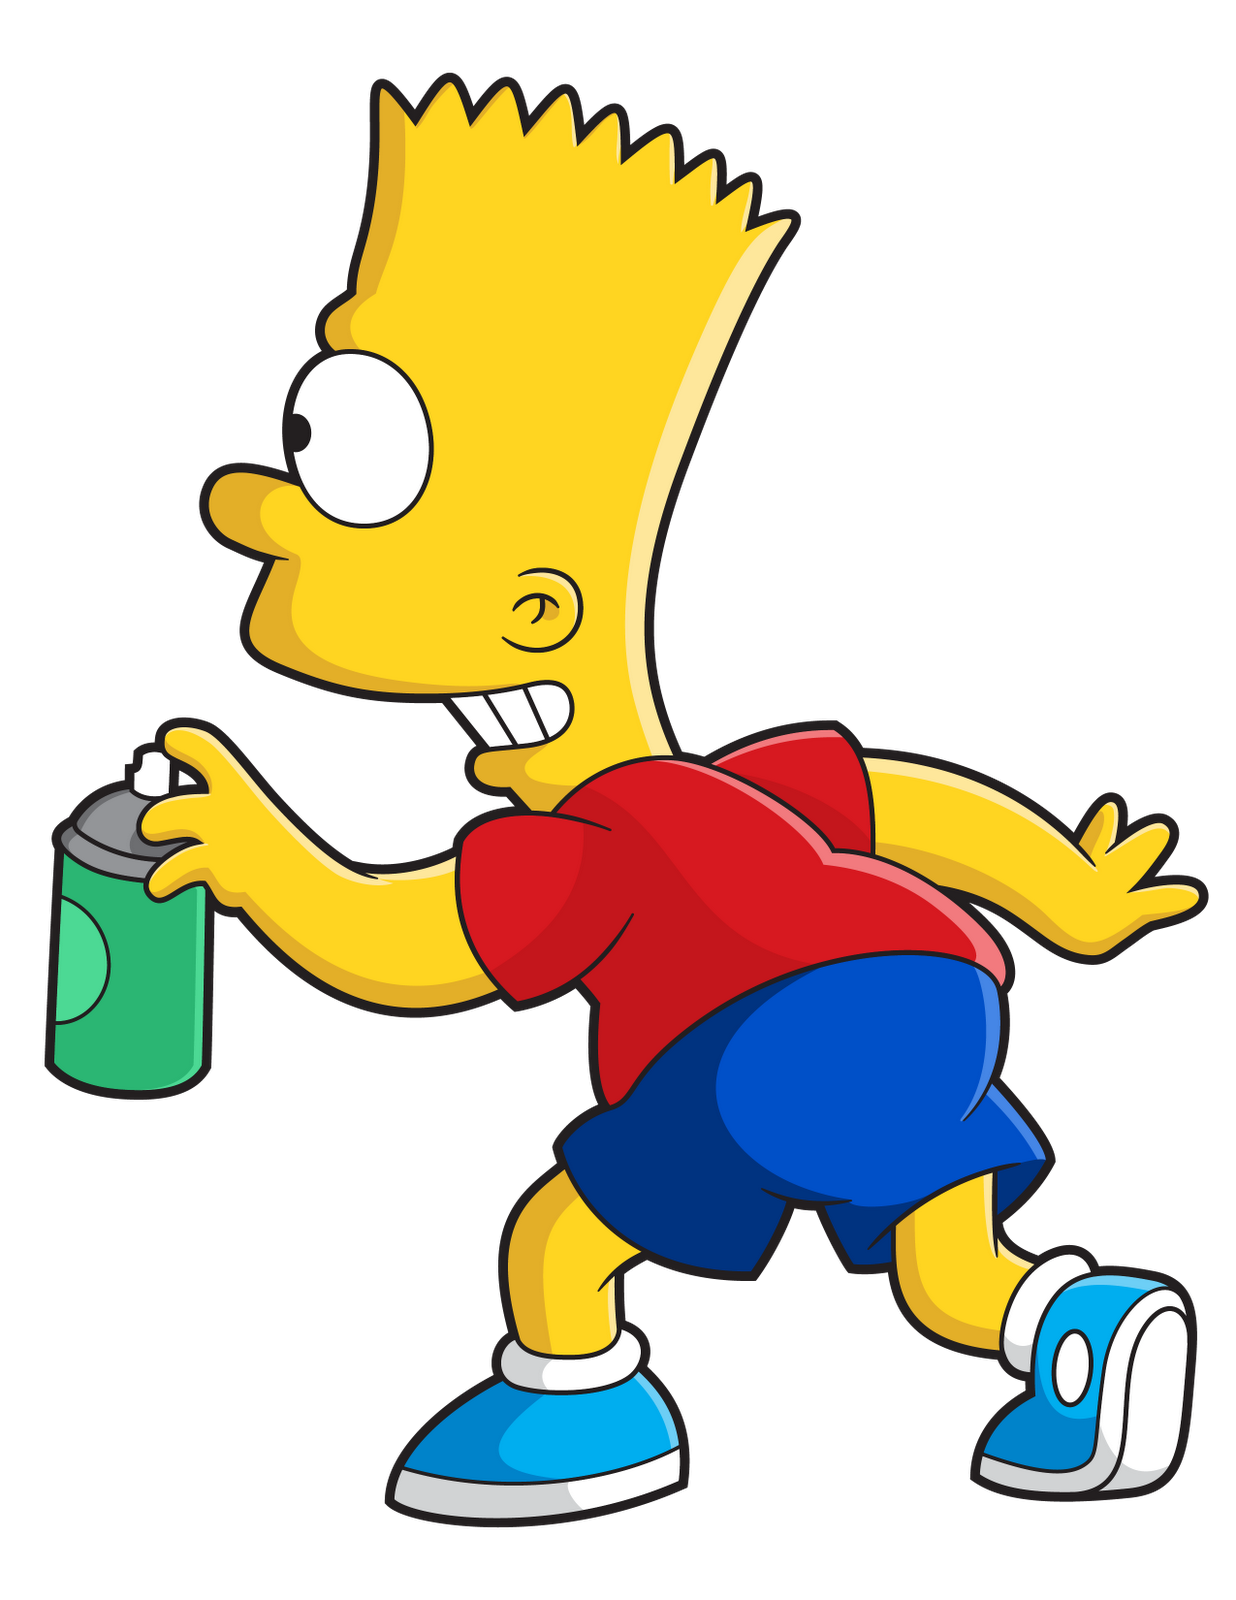 The Simpsons Character PNG Free Image